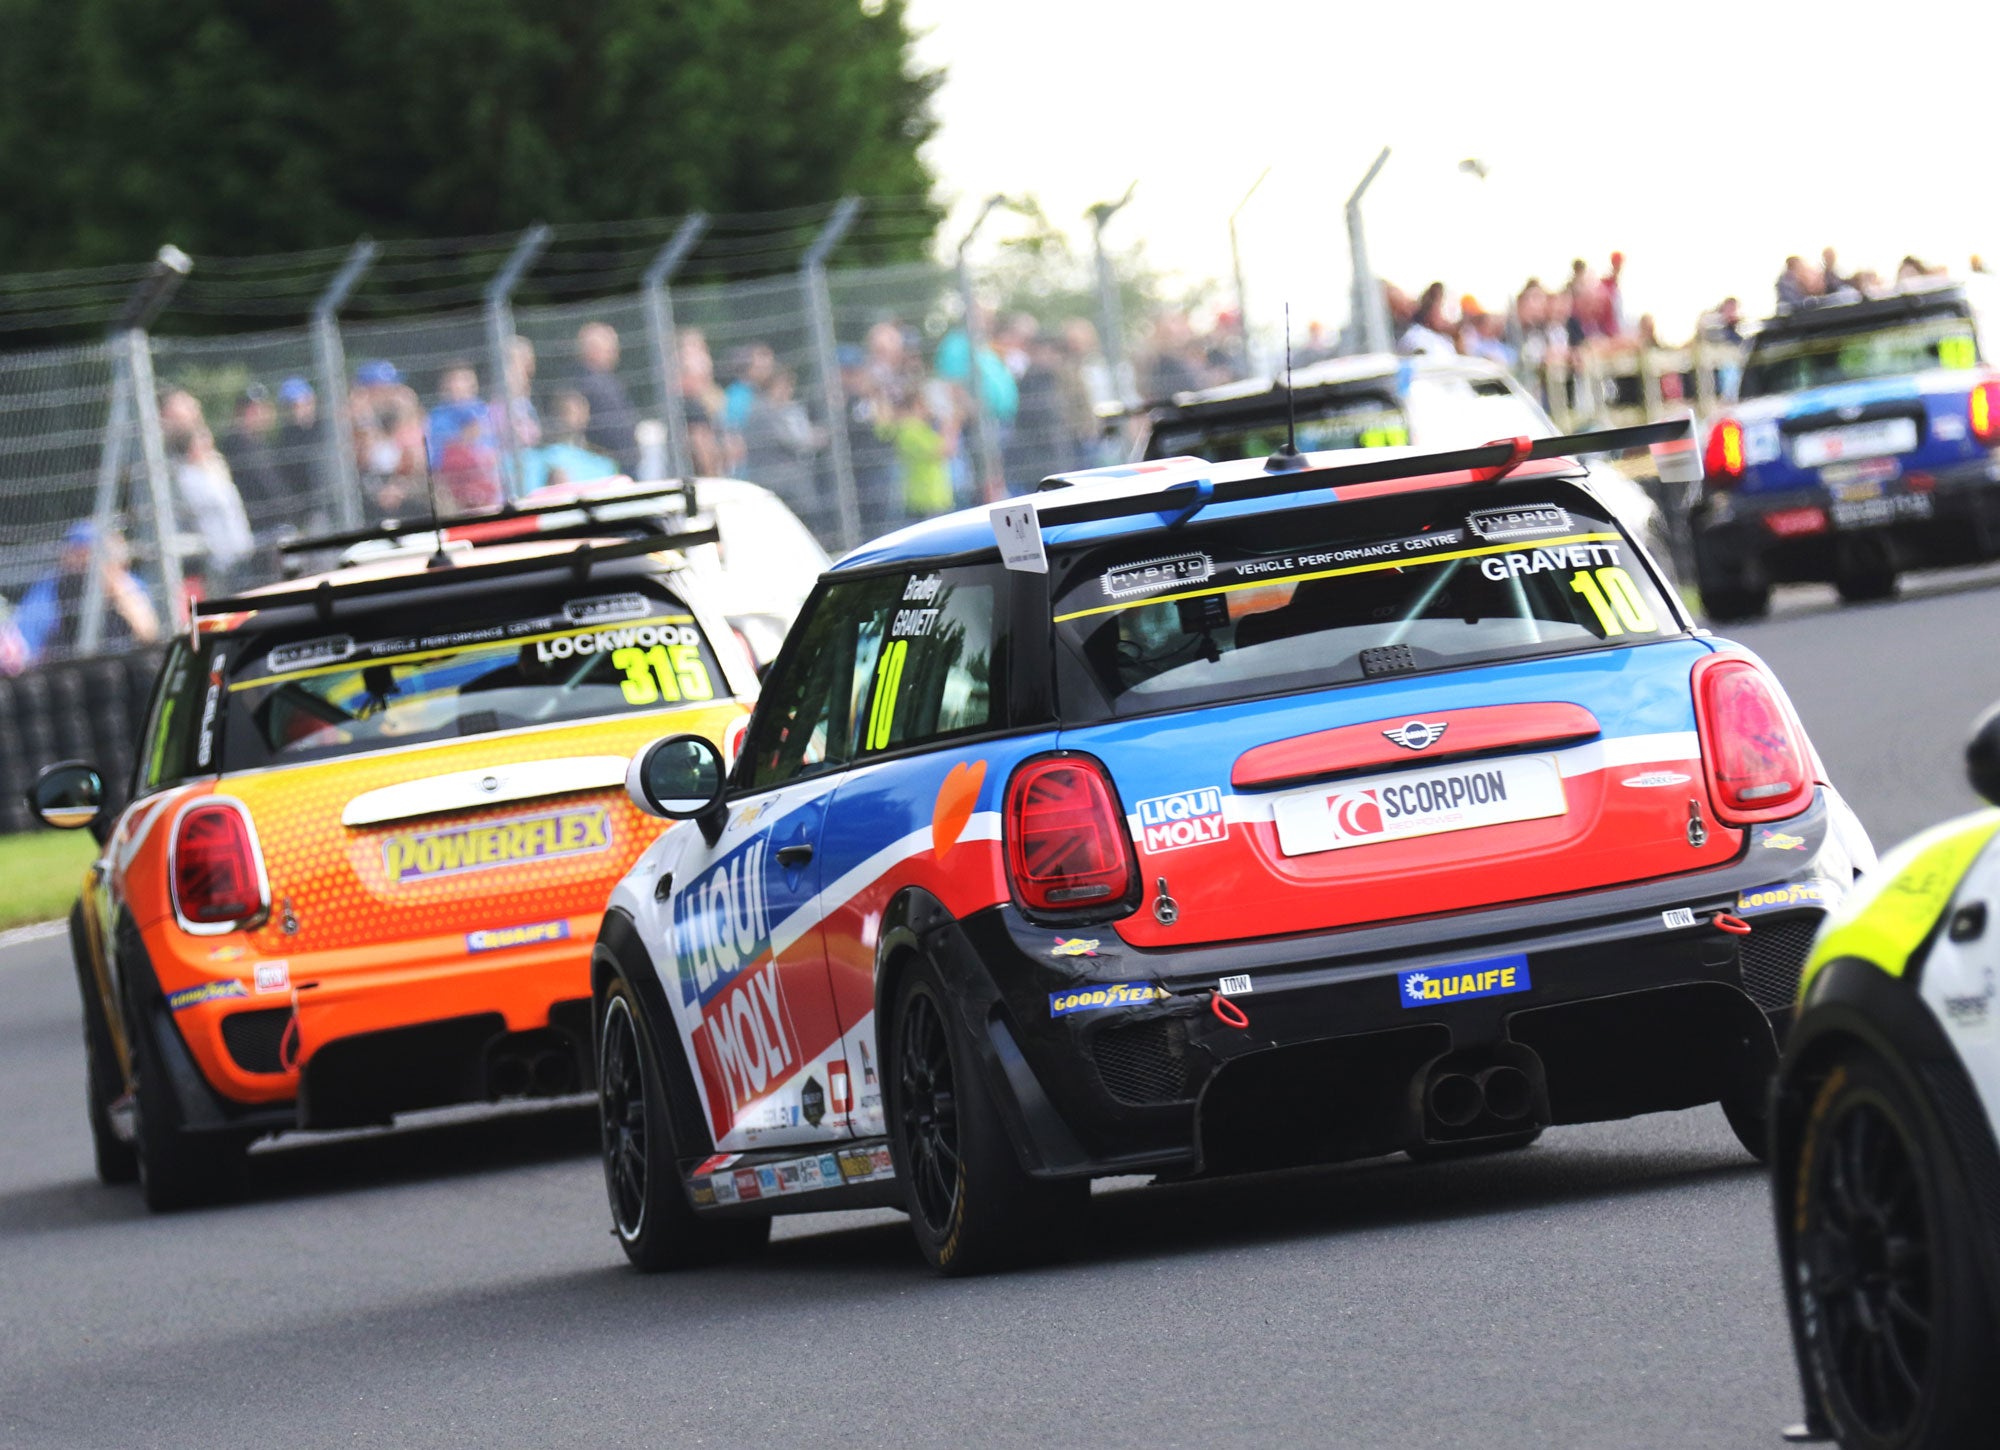 Bradley Gravett son of BTCC British Touring Car Champion Robb Gravett in the MINI Challenge JCW Series at Croft in 2021 Through Turn 3 with Big Crowds Graves Motorsport Cooper Racing Driver LIQUI MOLY LM Performance Thinking it Better